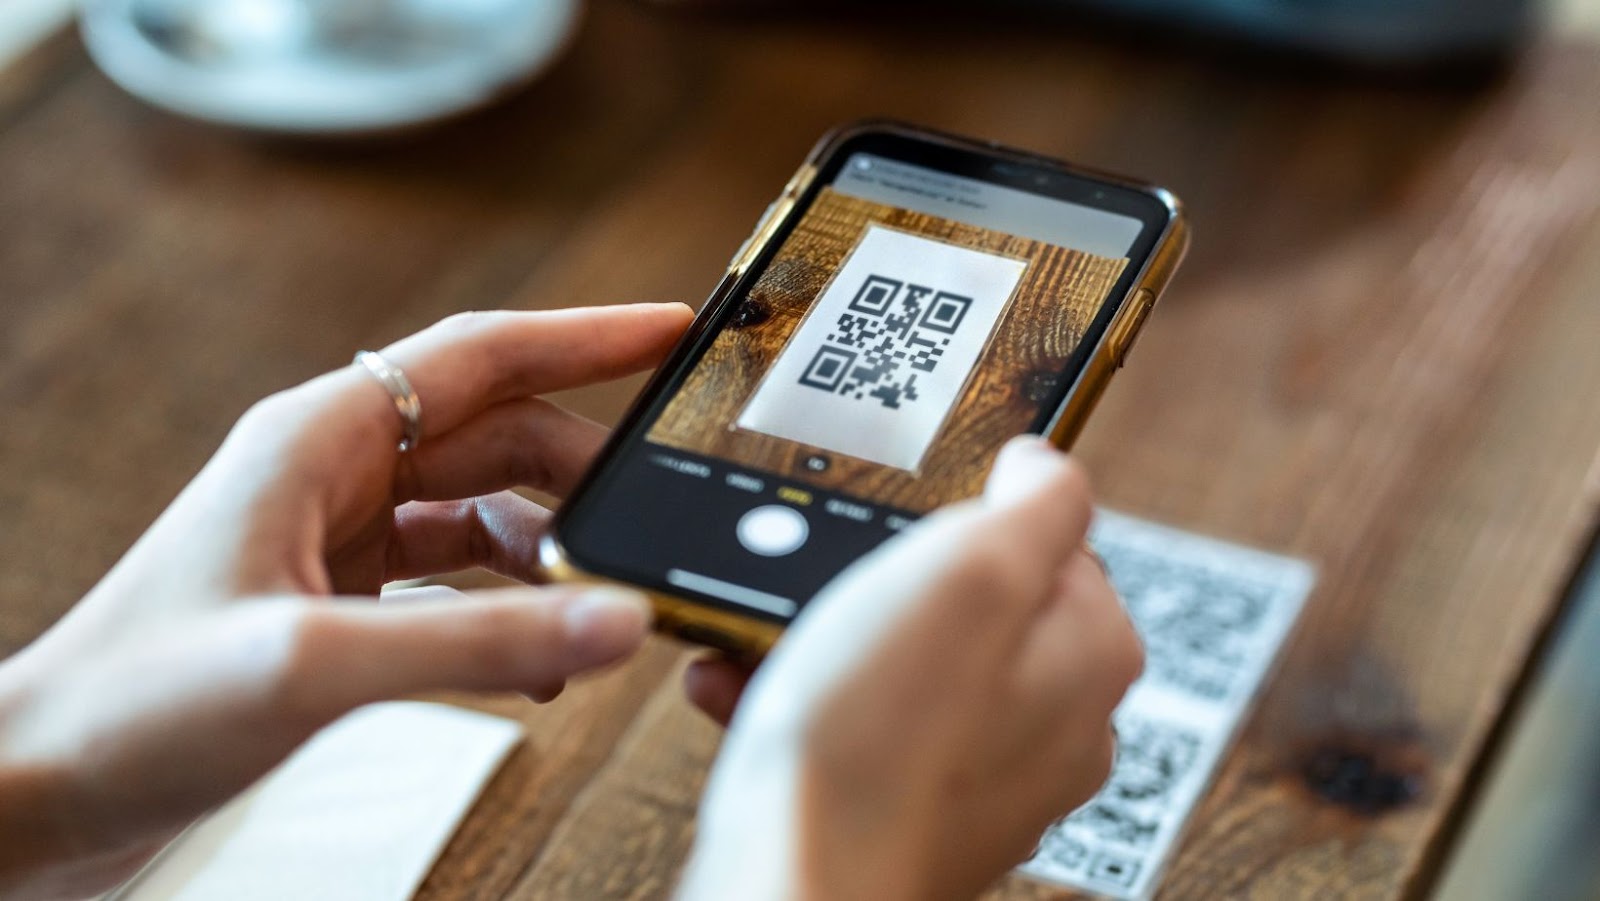 How to Share Your Home Network Info Using a QR Code